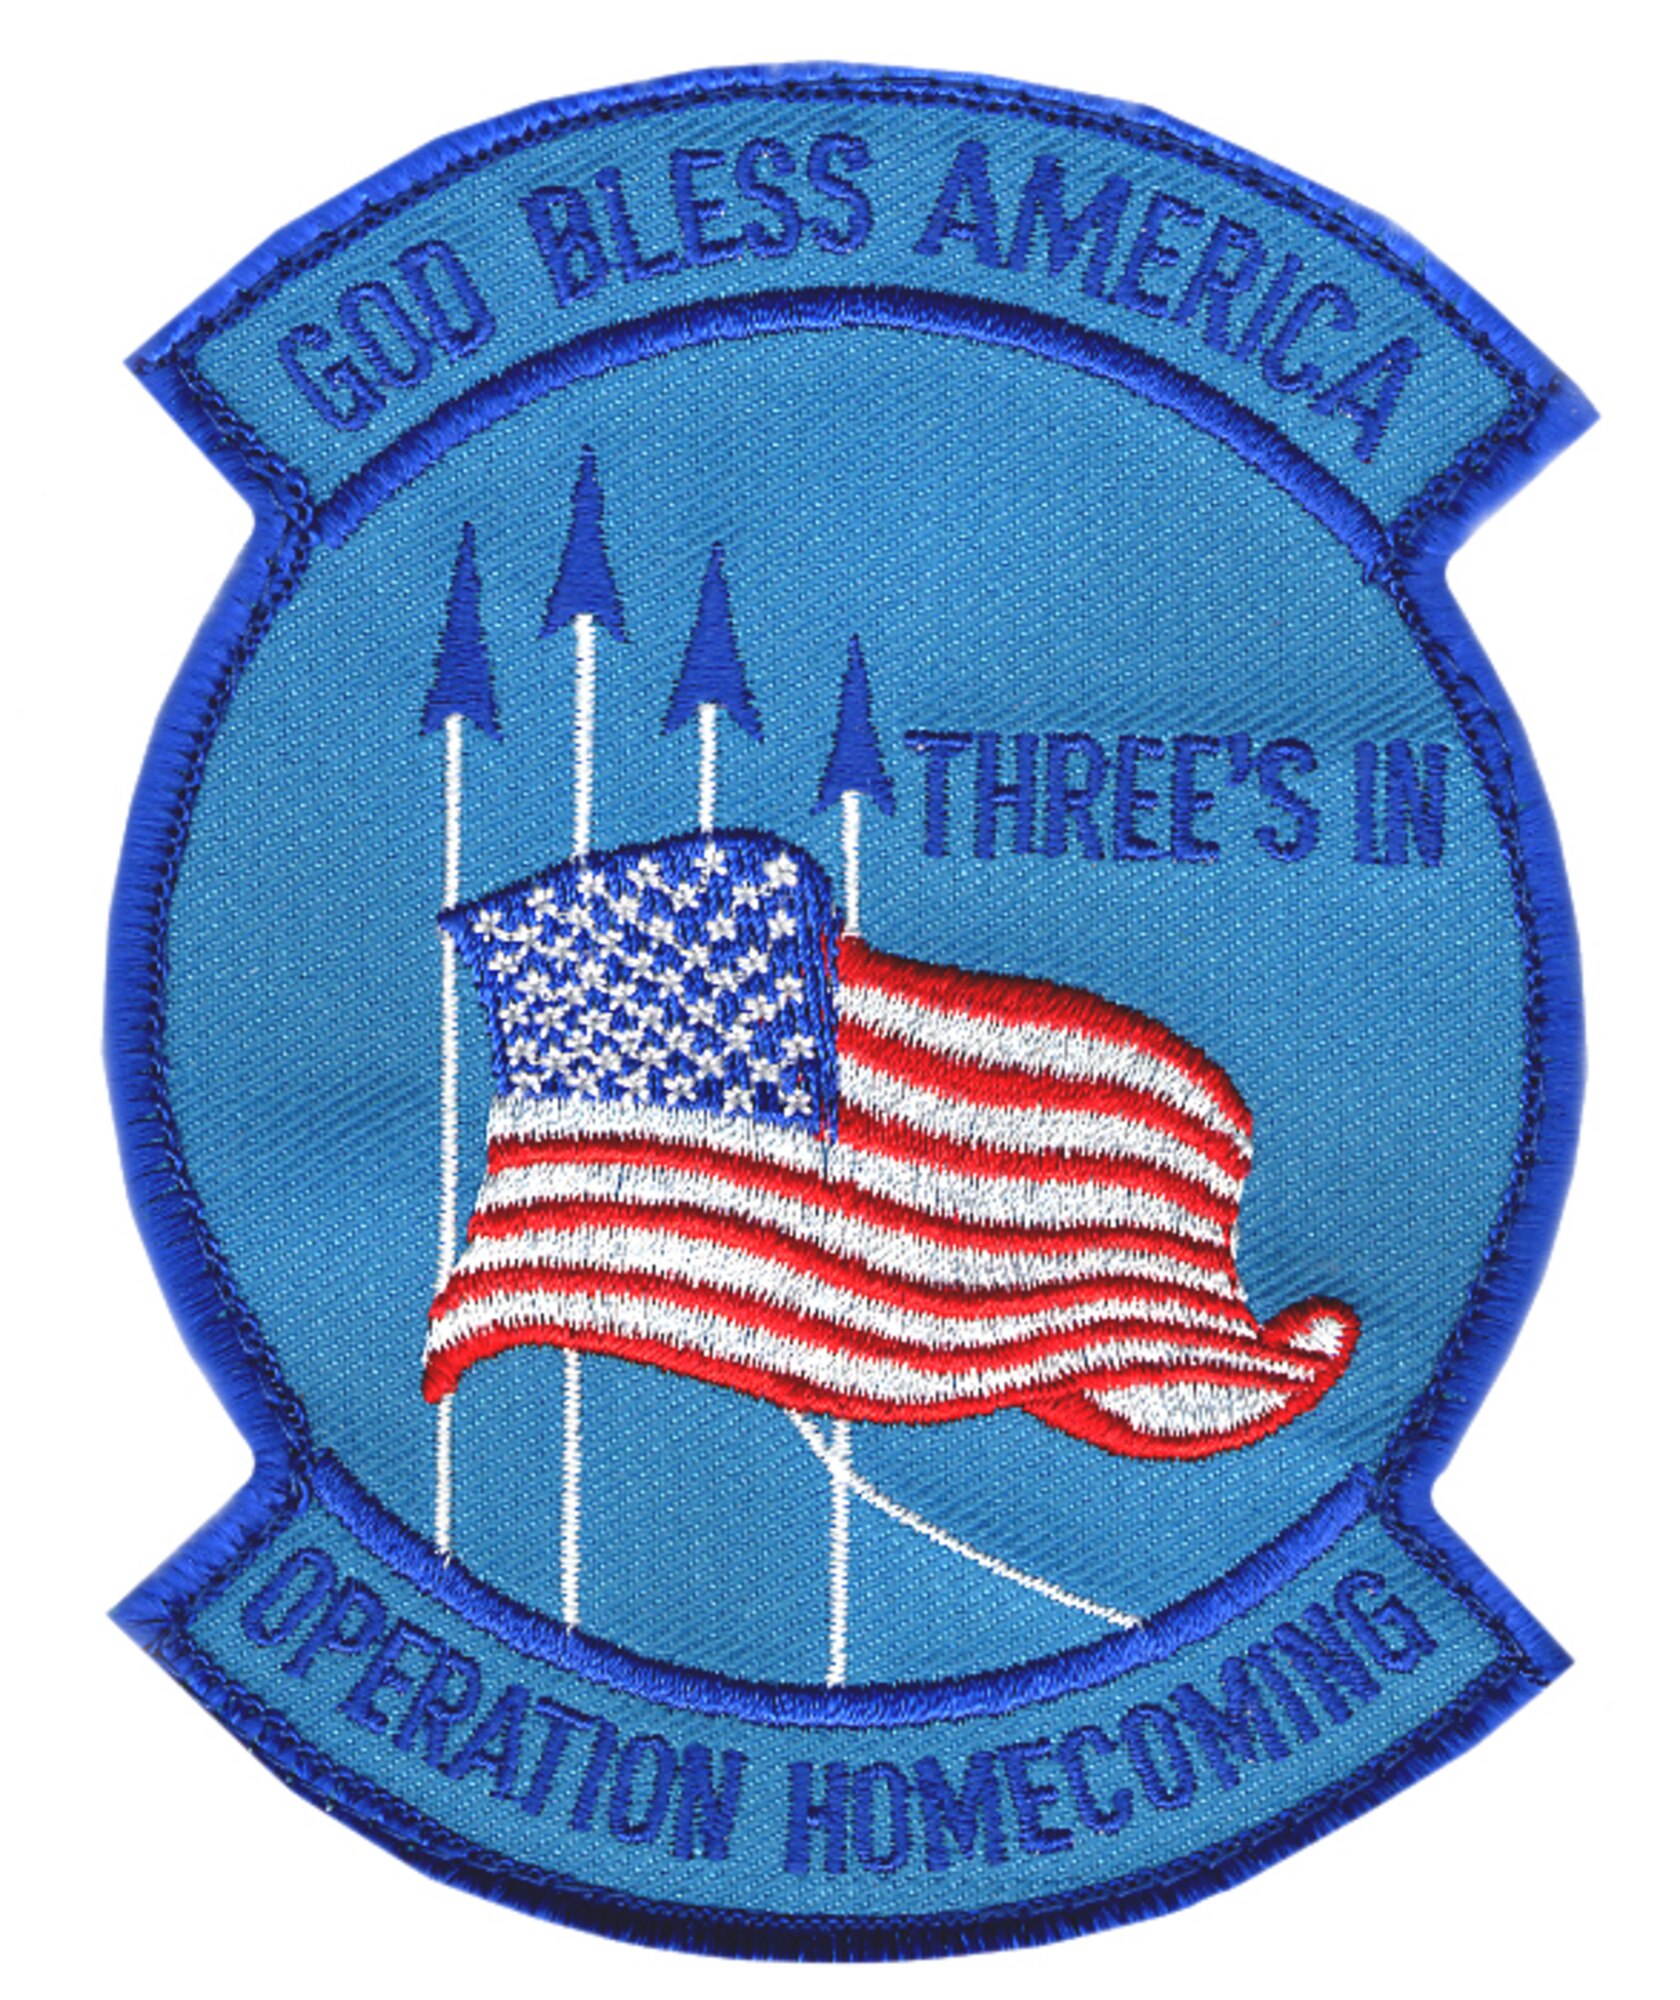 The Freedom Flyers patch